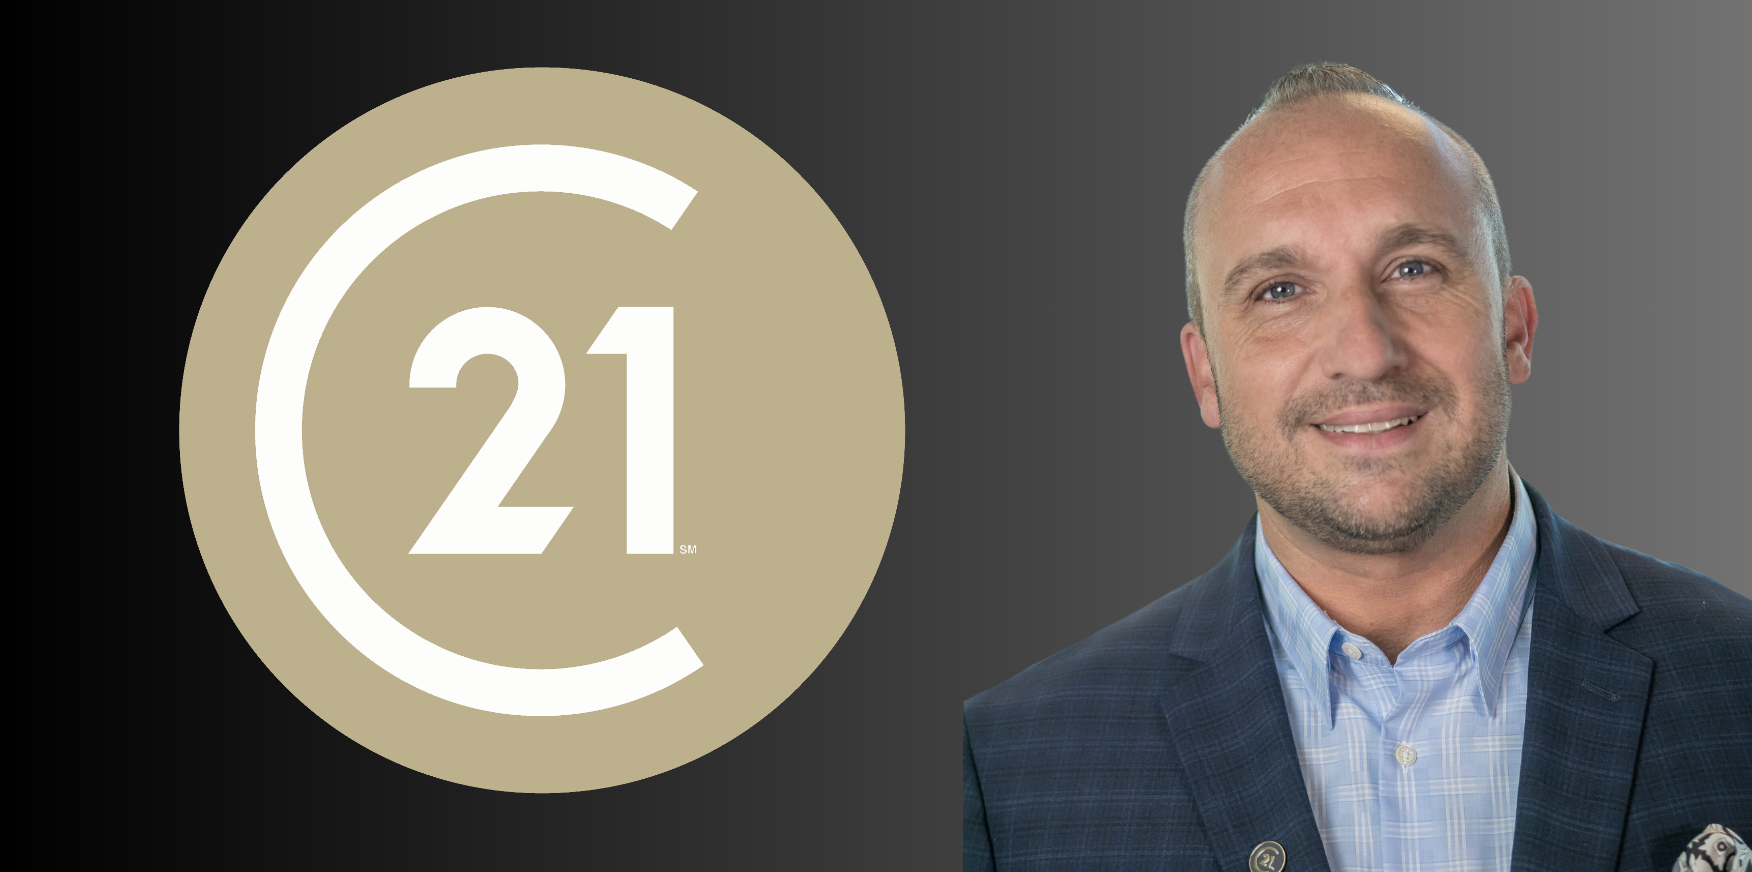 Century 21 refocuses on growth in Quebec, names new VP of operations